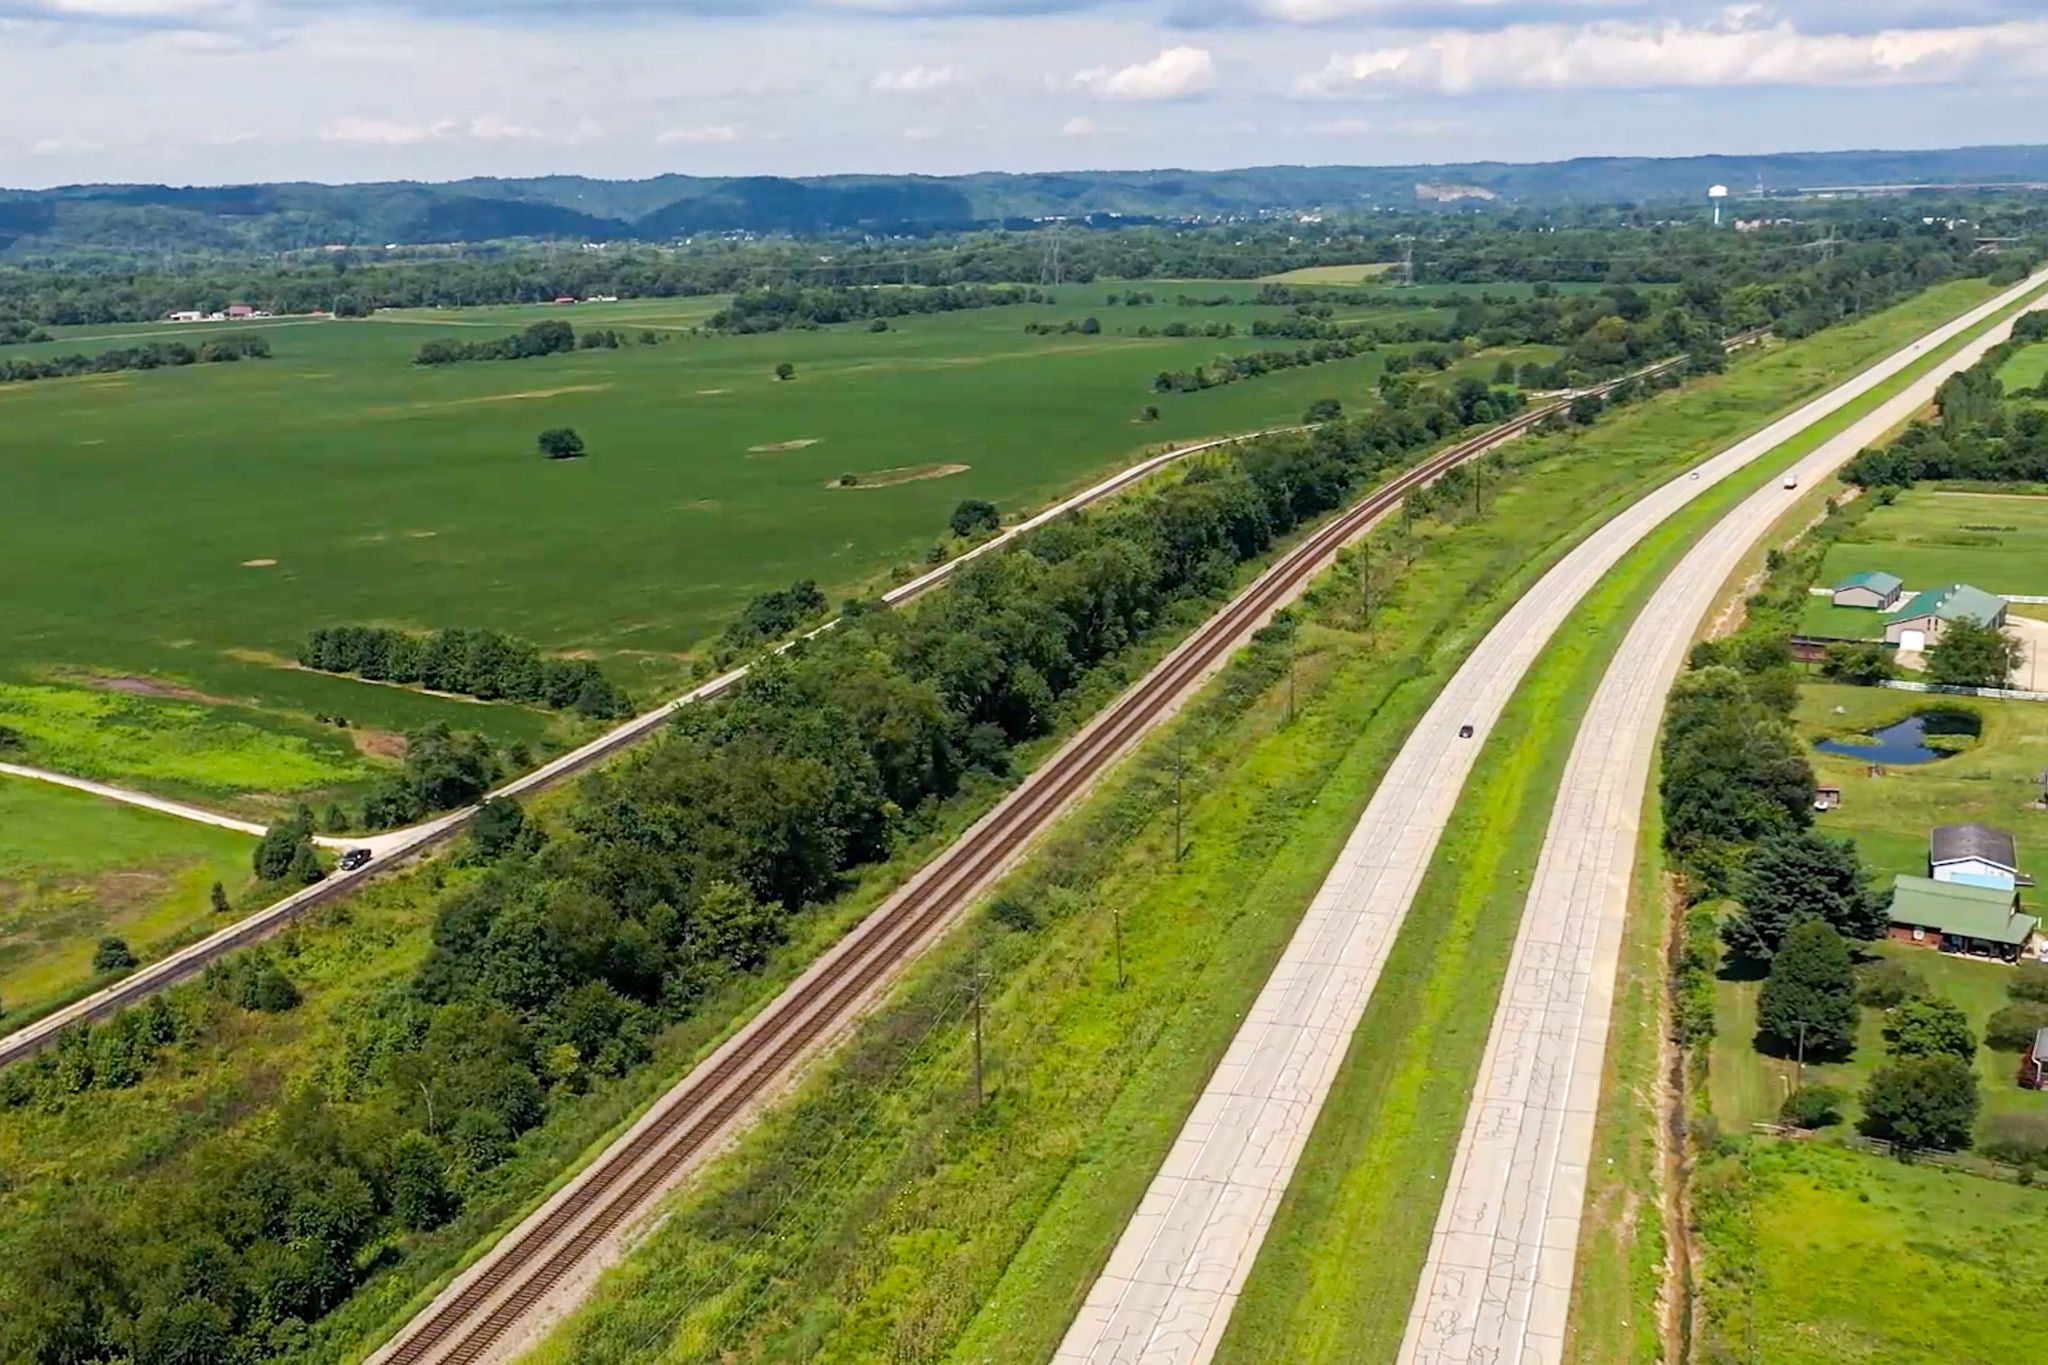 Aerial view of highway next to train tracks and a field, showing a potential rail served site for transporting low carbon fuels